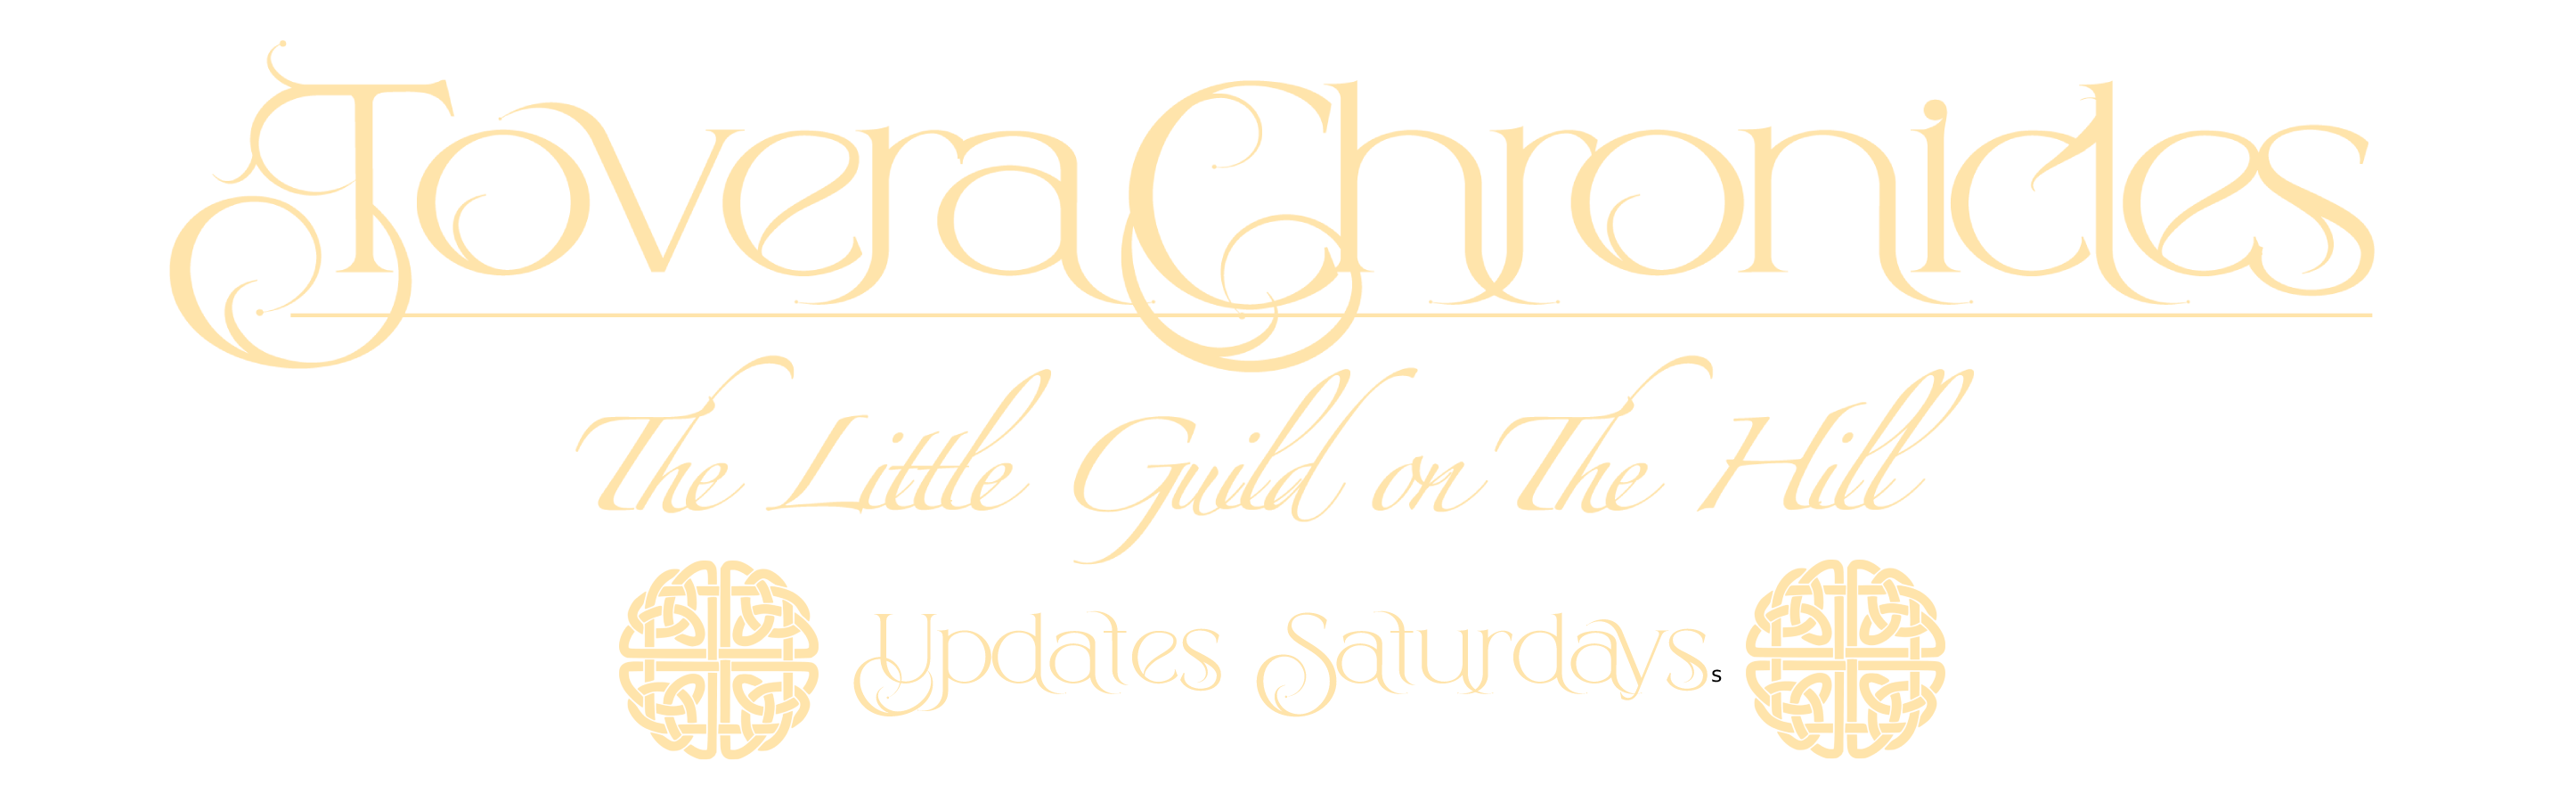 Tovera Chronicles: The Little Guild on the Hill. Updates Saturdays